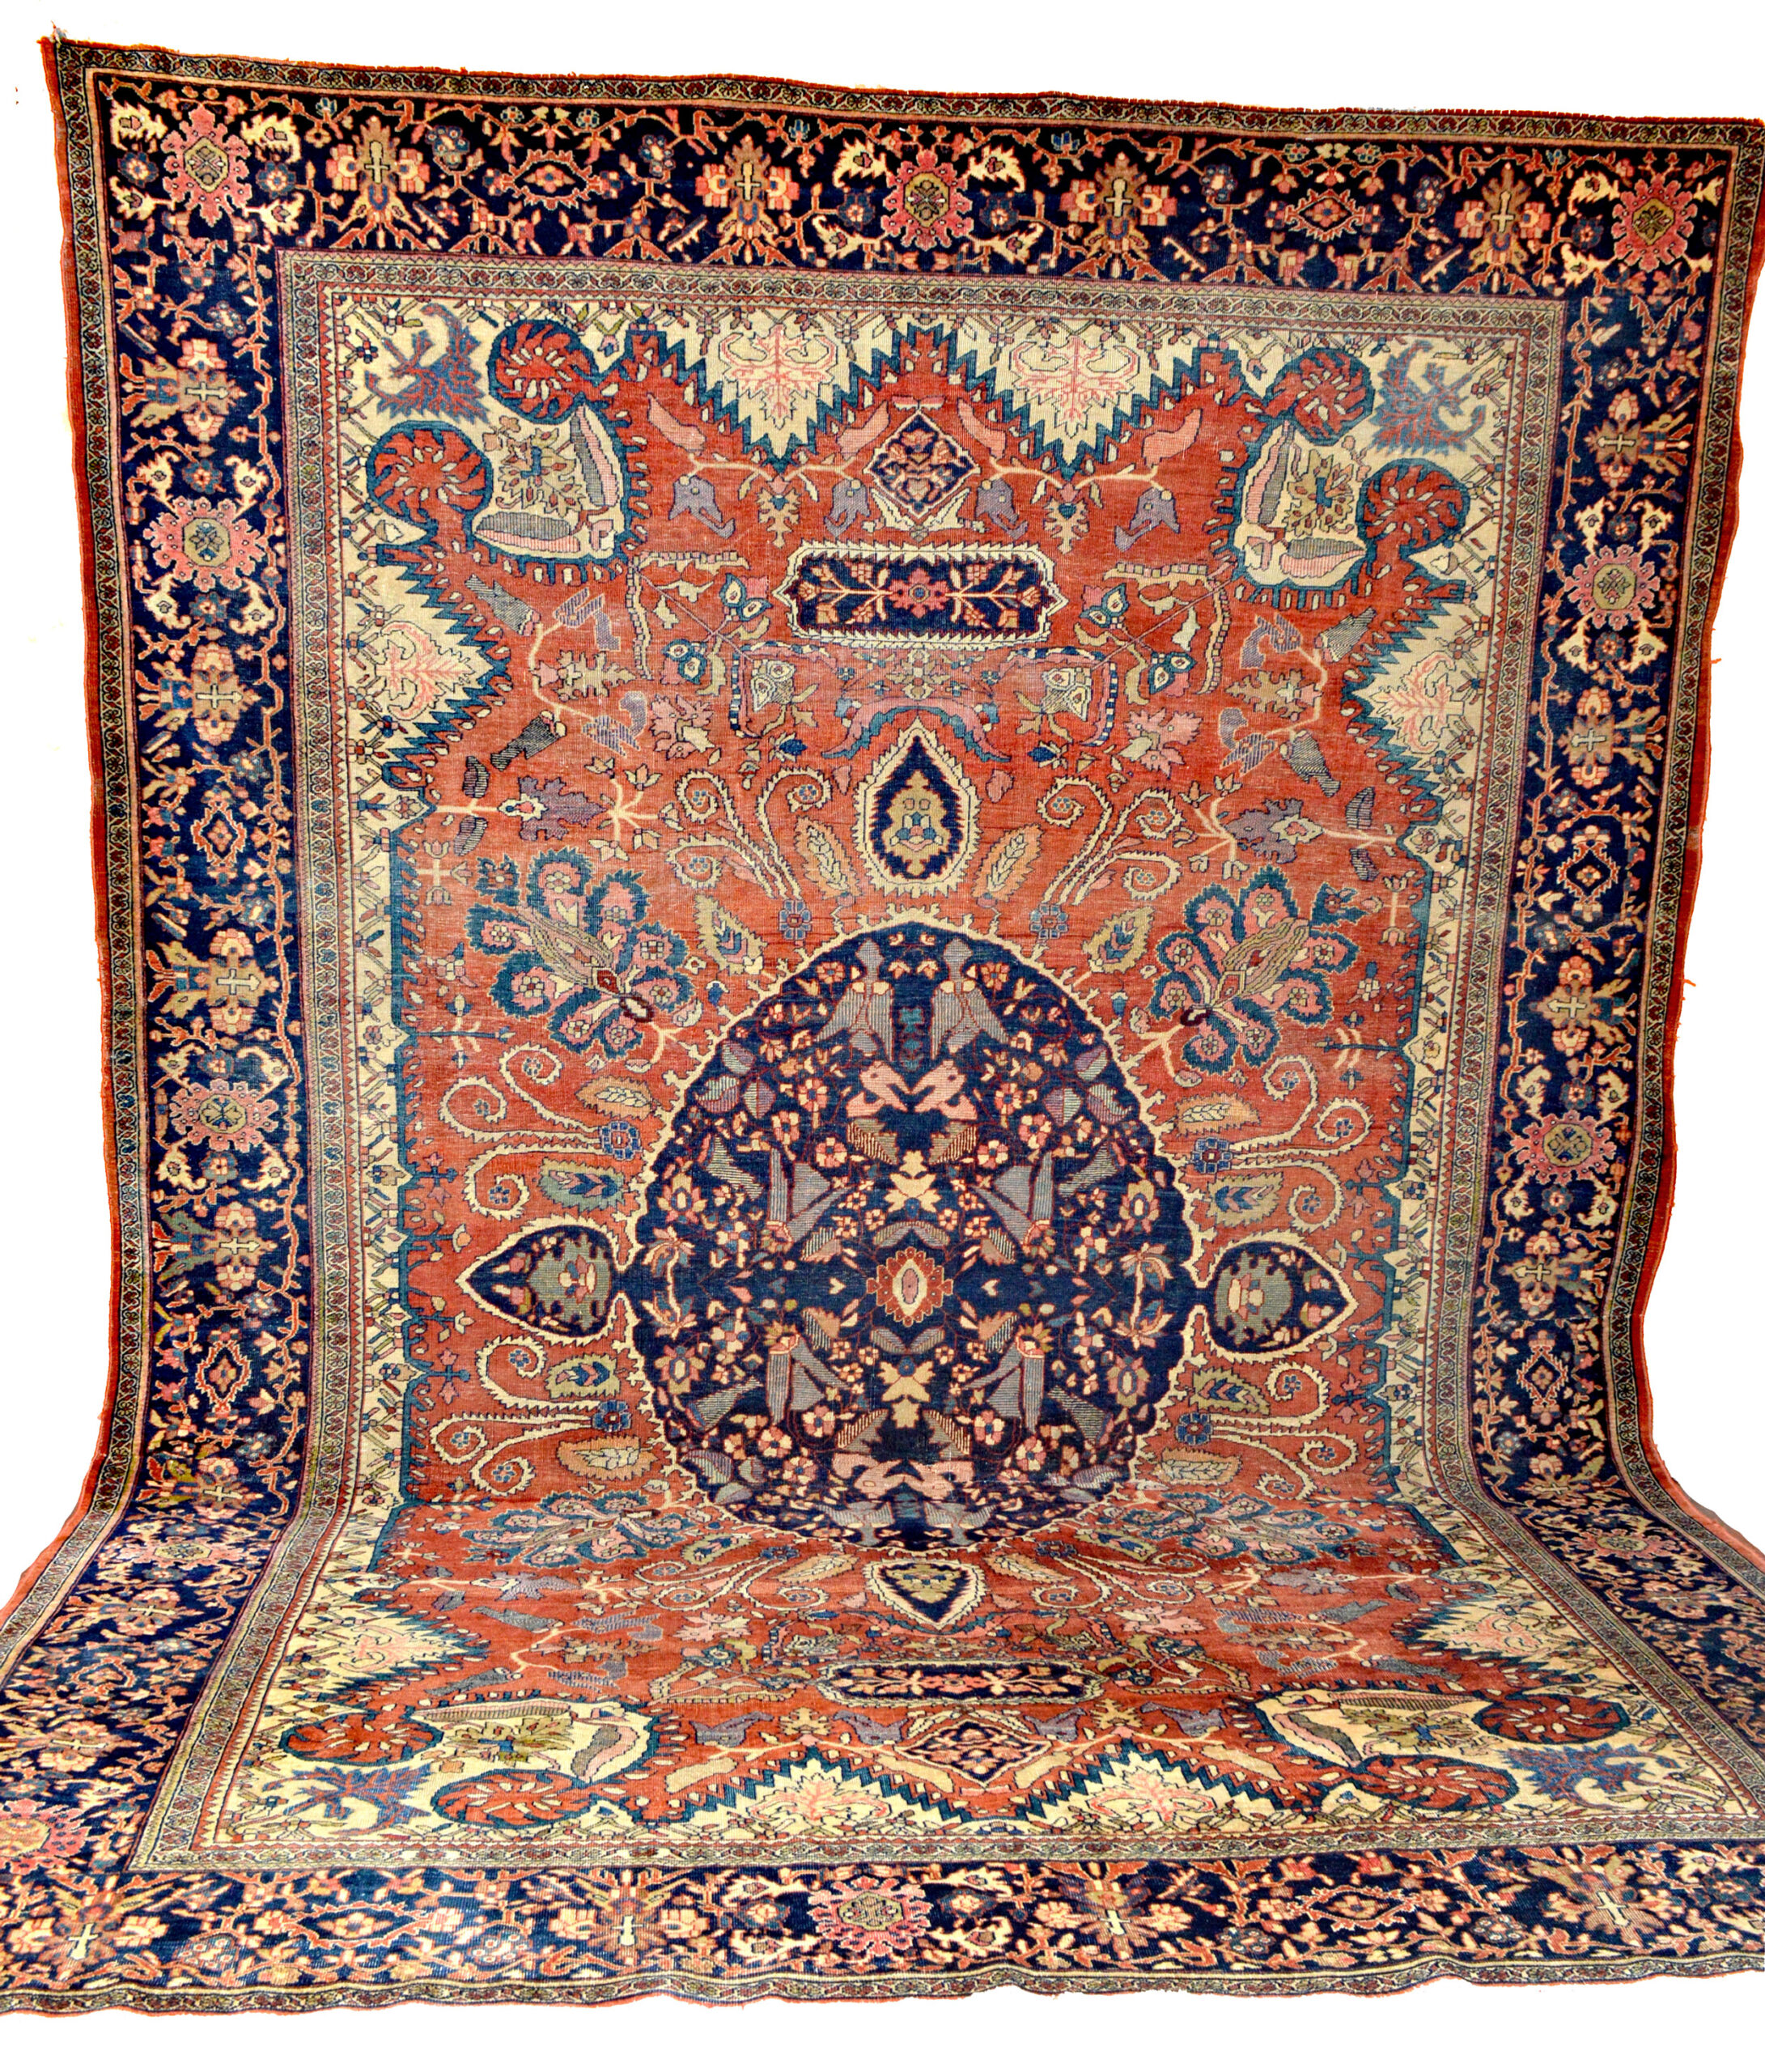 A 19th century central Persian Fereghan Sarouk carpet with a navy blue medallion on a terra cotta color field that is framed by ivory corner spandrels and a navy blue border, circa 1895